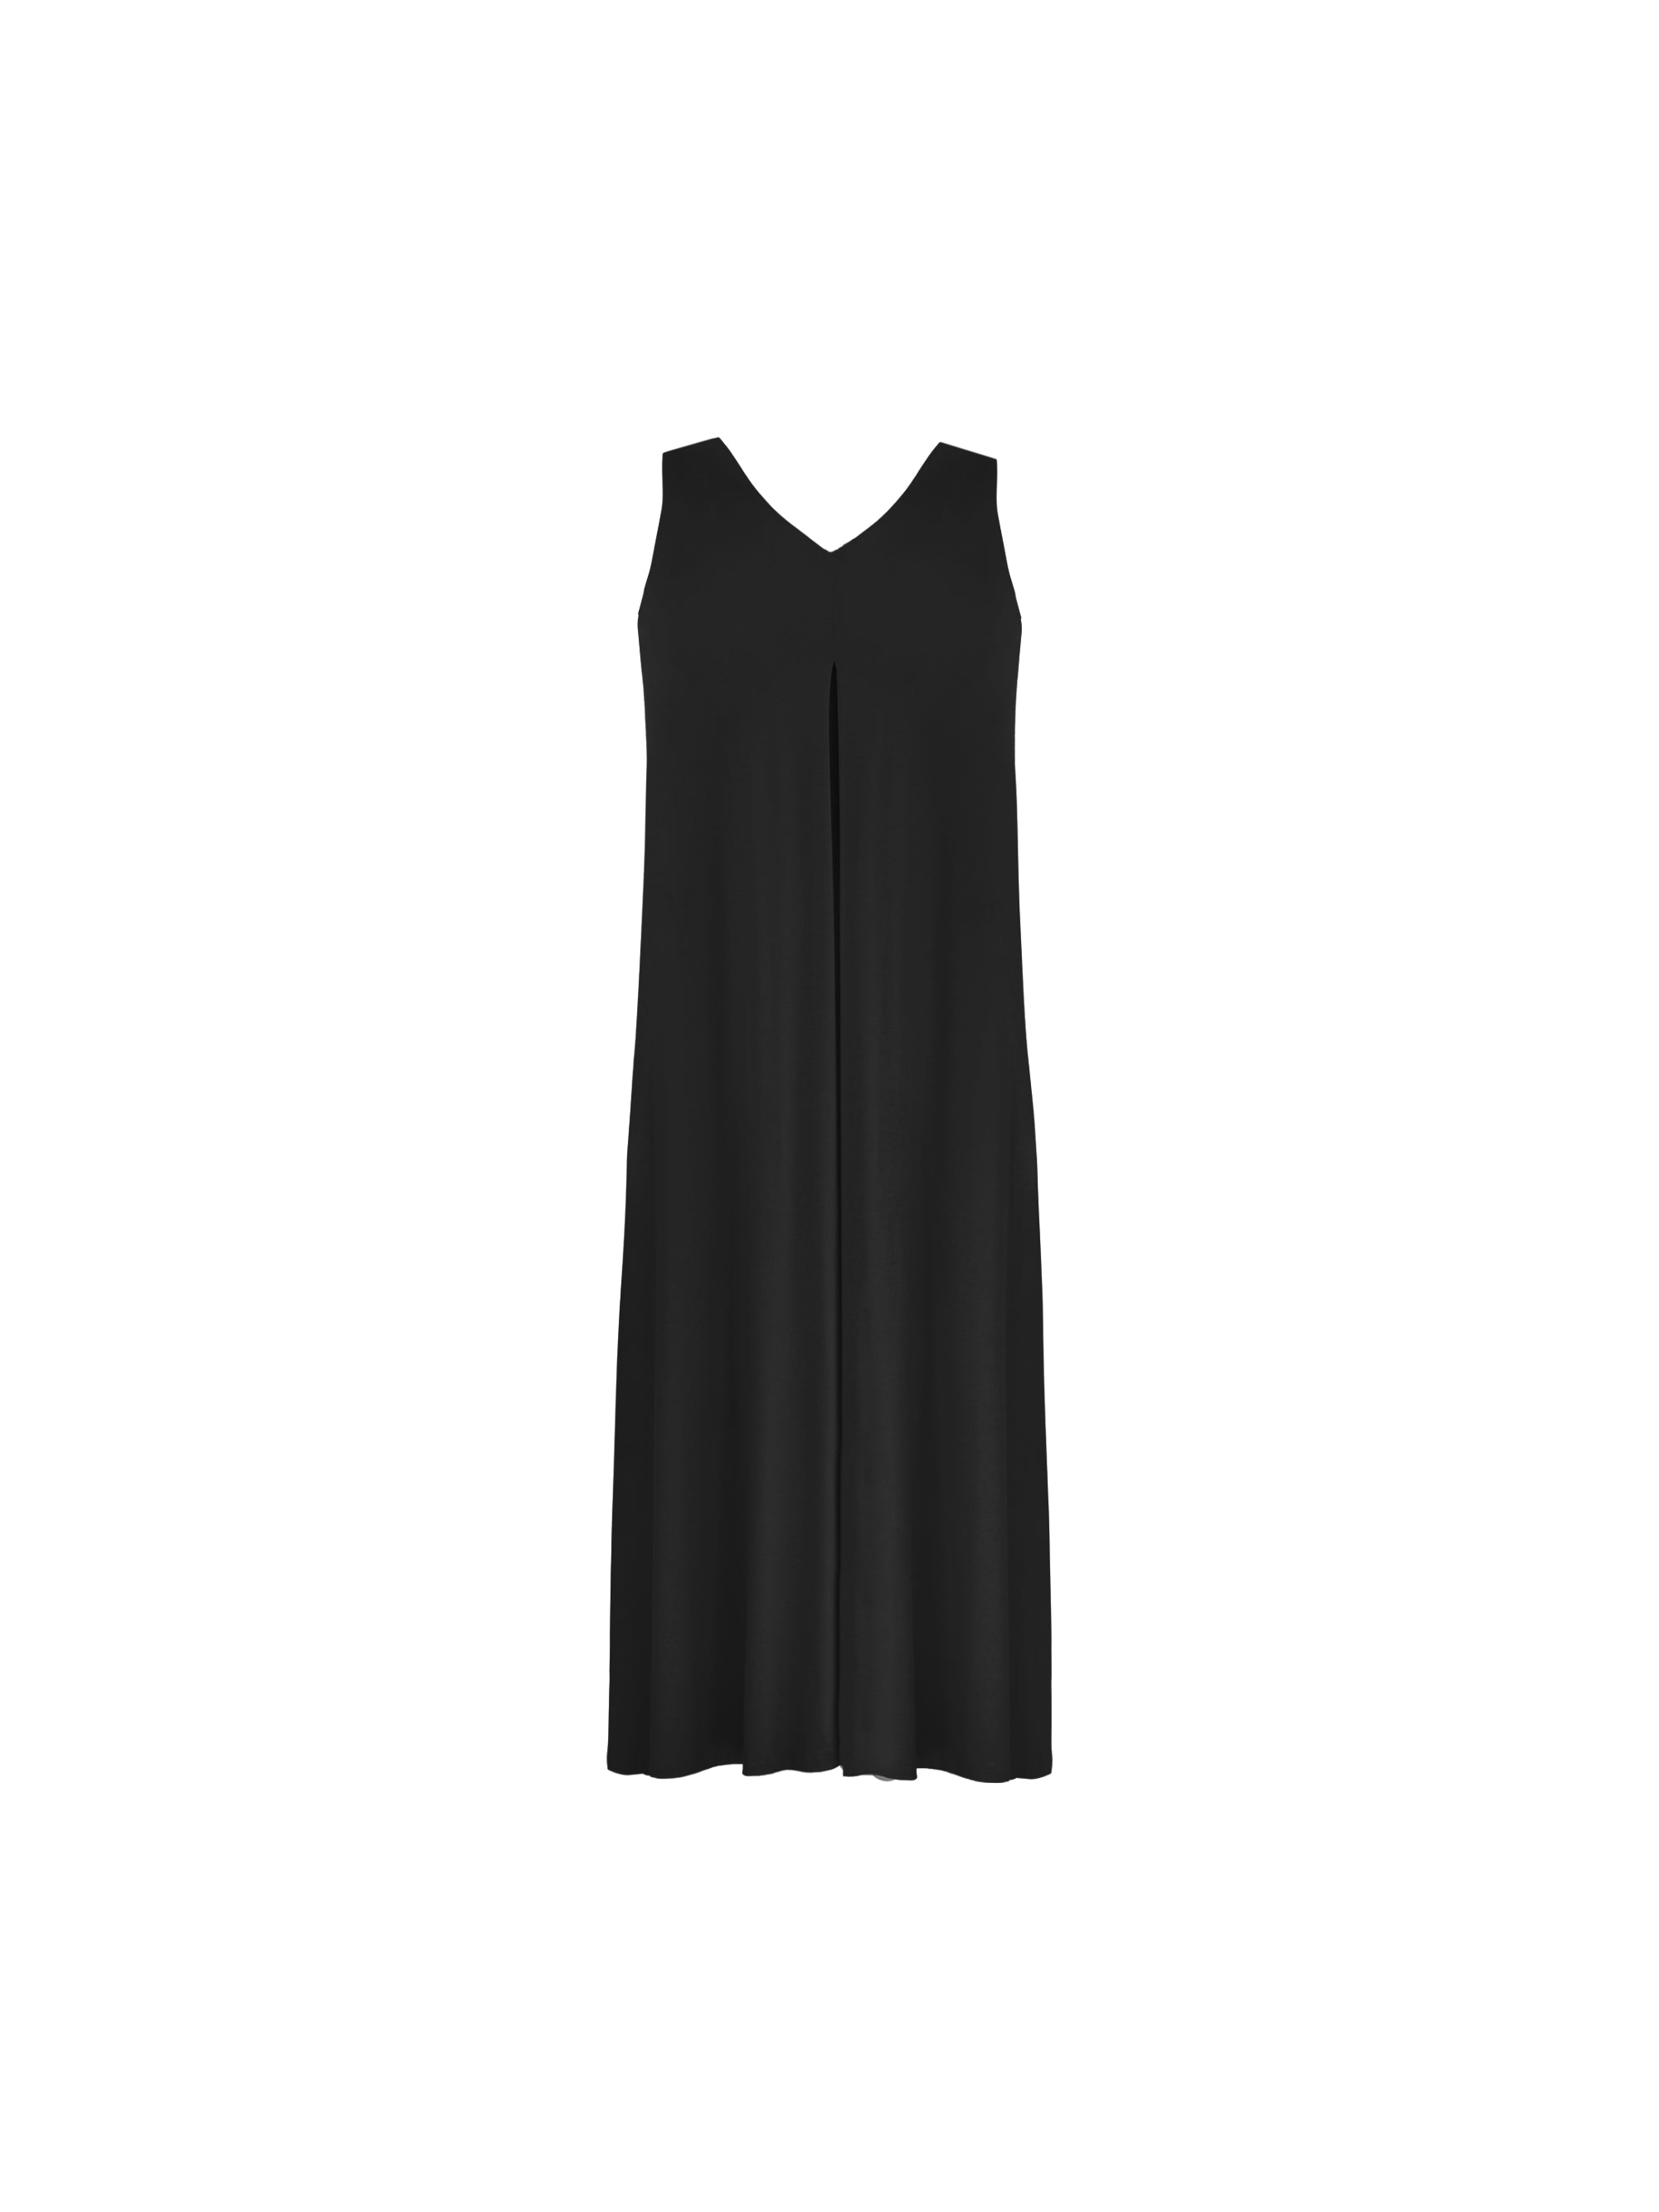 Petite Black Jersey Relaxed Midaxi Dress